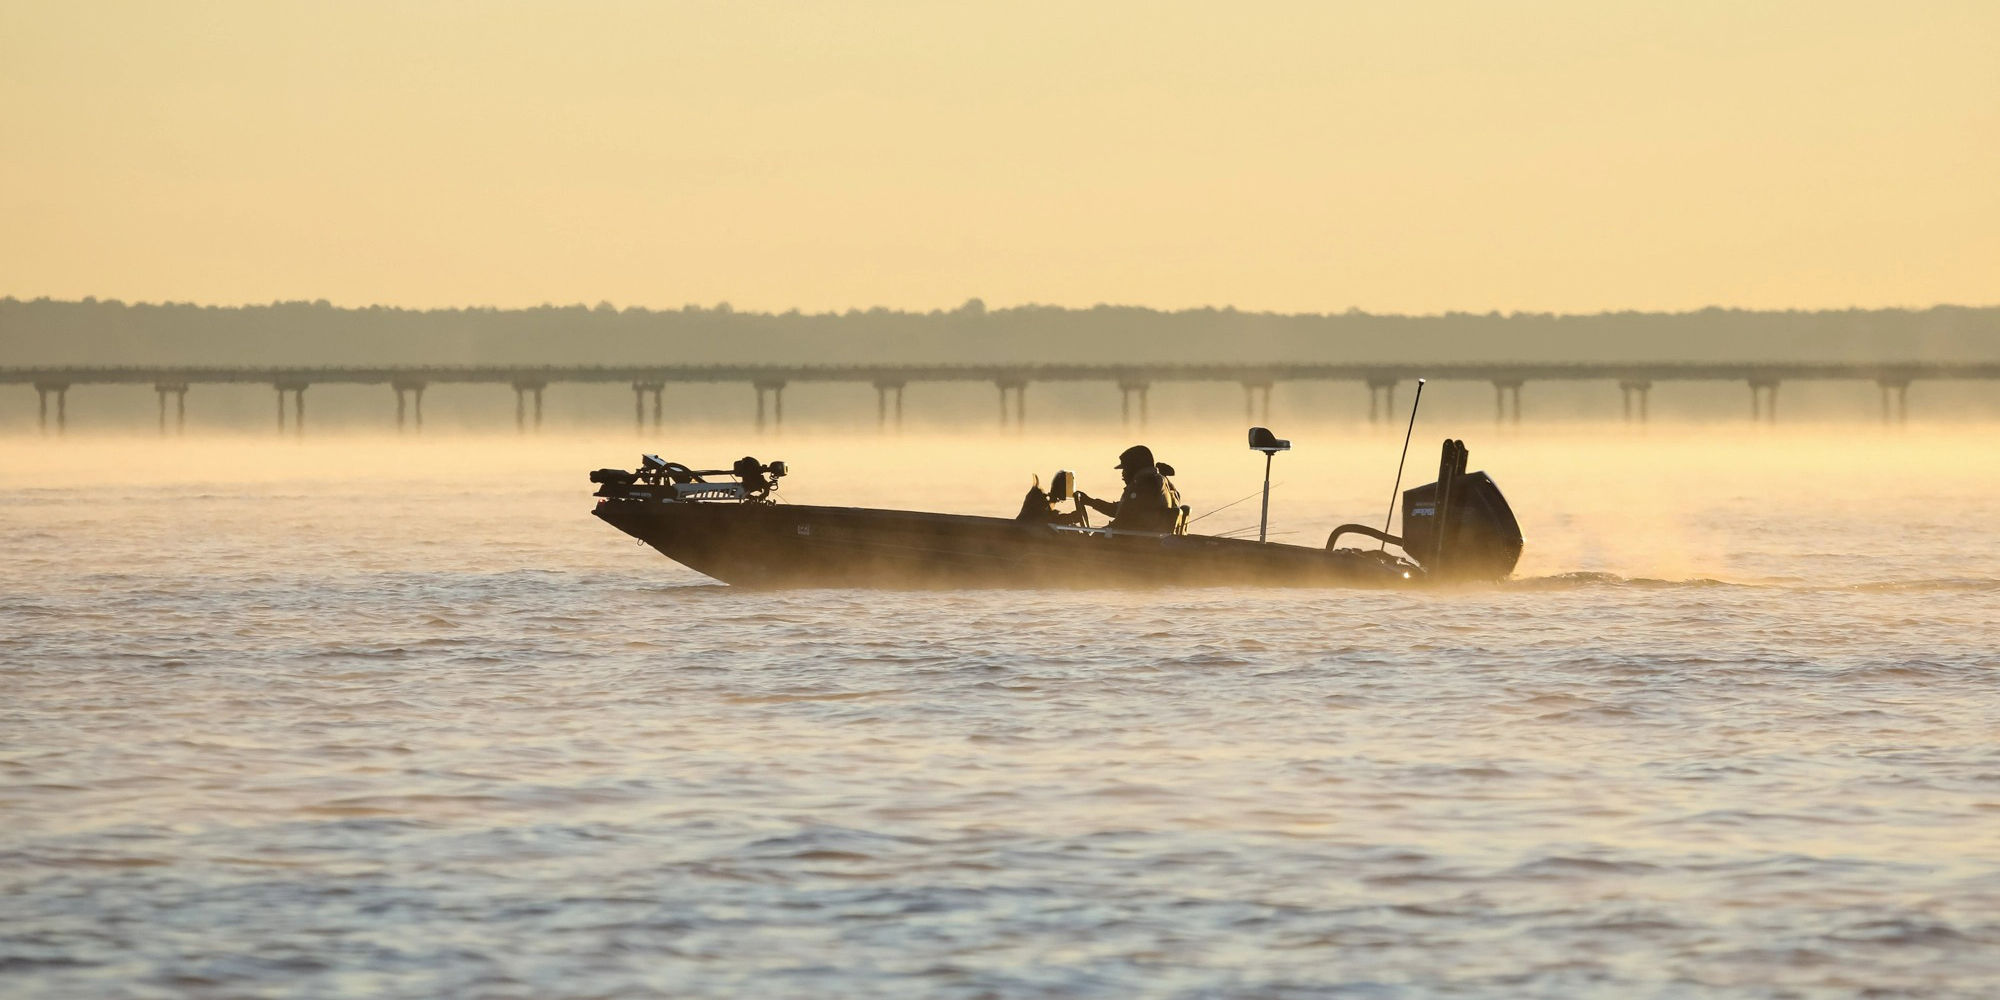 The Major League Fishing Tournament could return next year